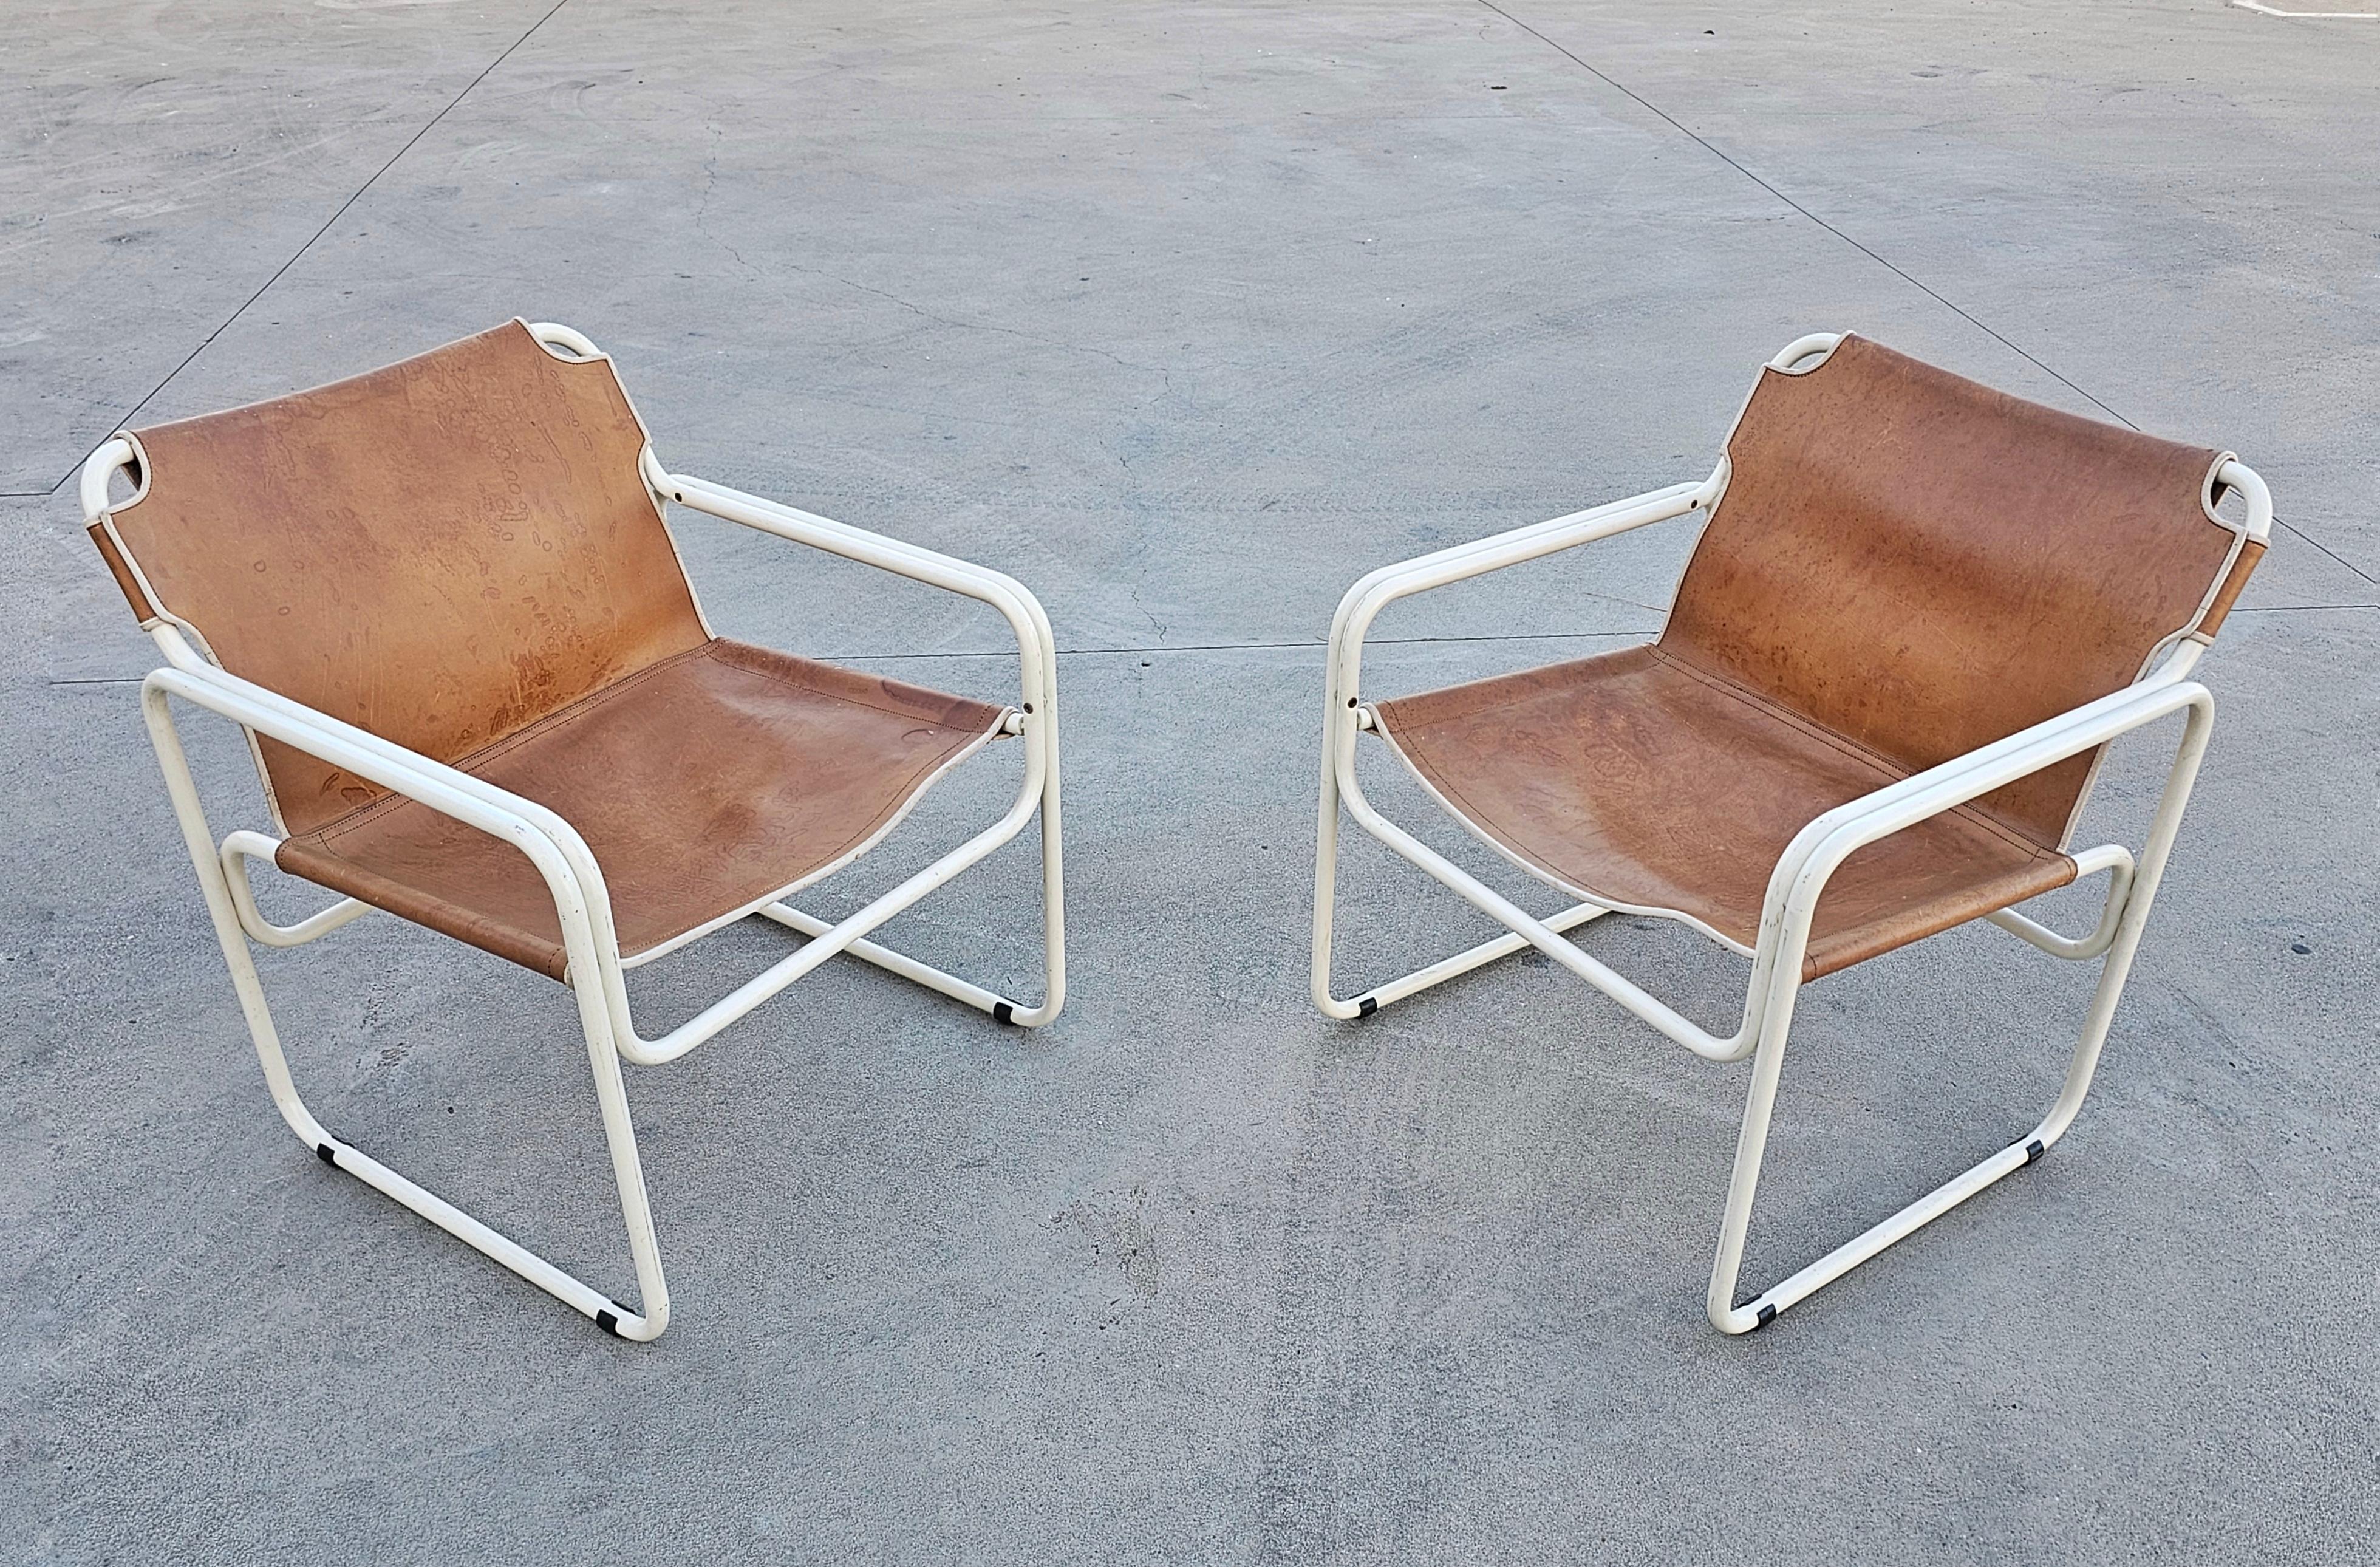 In this listing you will find a pair of Bauhaus Style Tubular Leather chairs manufactured by Jox Interni. They feature off-white frames and cognac leather seats. Made in The Netherlands in 1970s.

Good vintage condition with some signs of time and